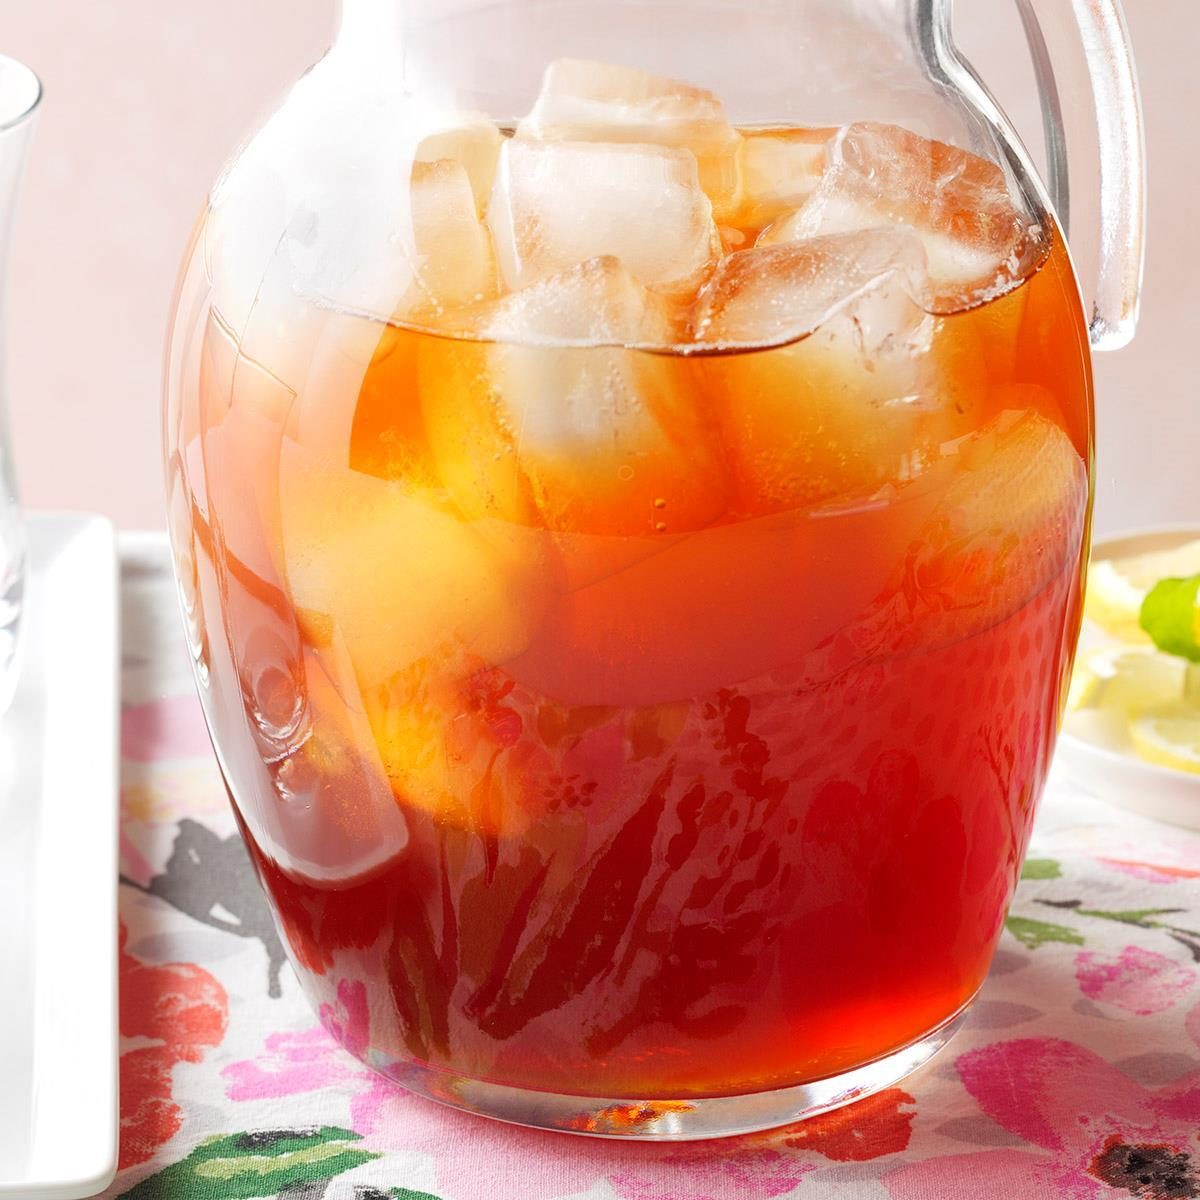 Sweet Tea Concentrate Recipe: How to Make It